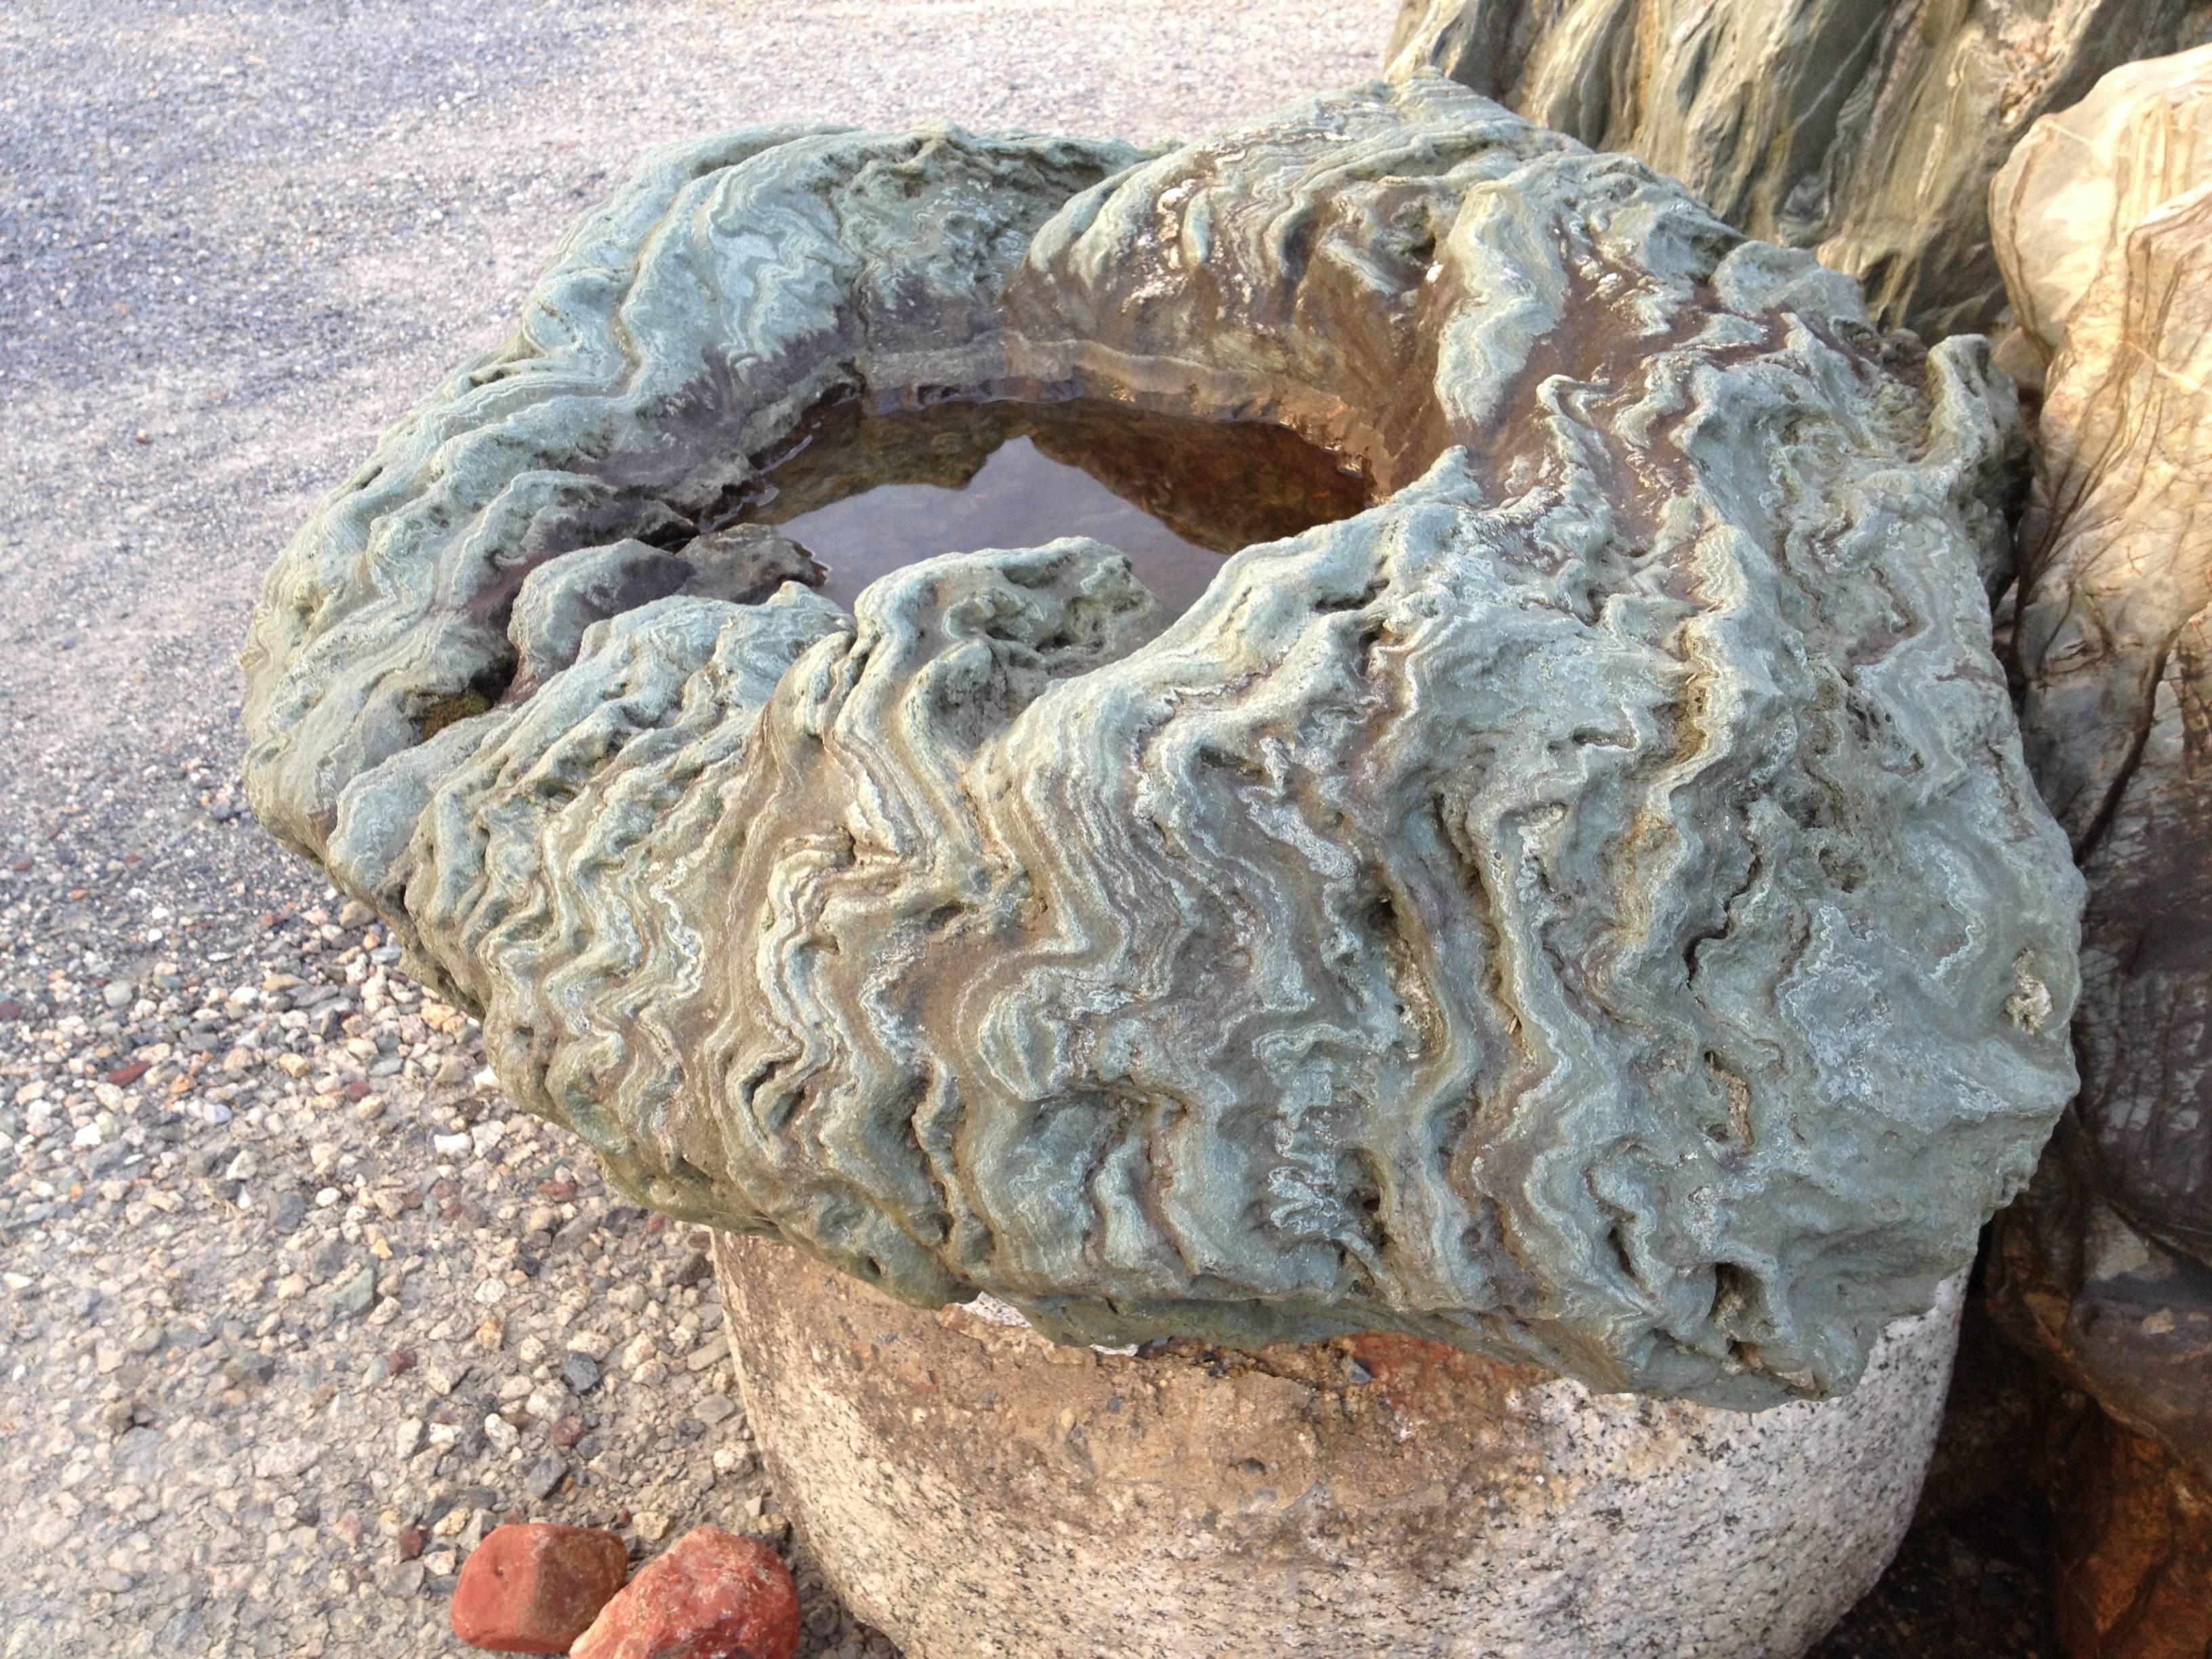 Wow! From Japan, we were lucky to find this natural and extraordinary one-of-a-kind work of art! It is a large natural green color stone water or plant basin in natural boulder form - notice the ancient rippled surfaces! This one was sourced from a